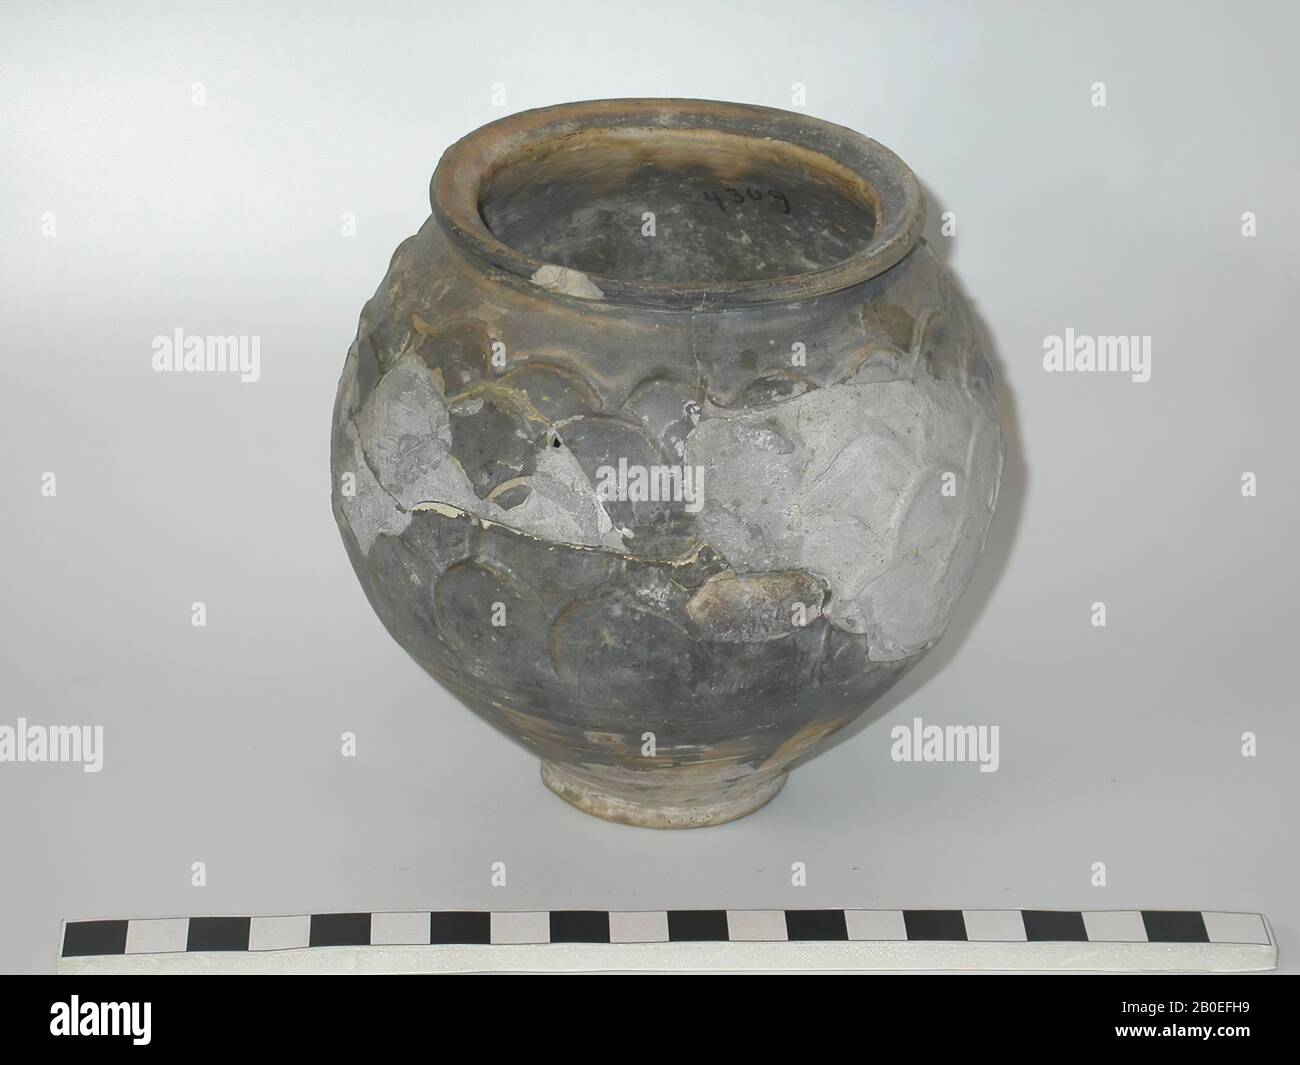 Cup of painted earthenware with scaly surface. Old glues and additions, surface damage, cup, earthenware, h: 11.6 cm, diam: 11.6 cm, roman, Netherlands, South Holland, Katwijk, Valkenburg Stock Photo